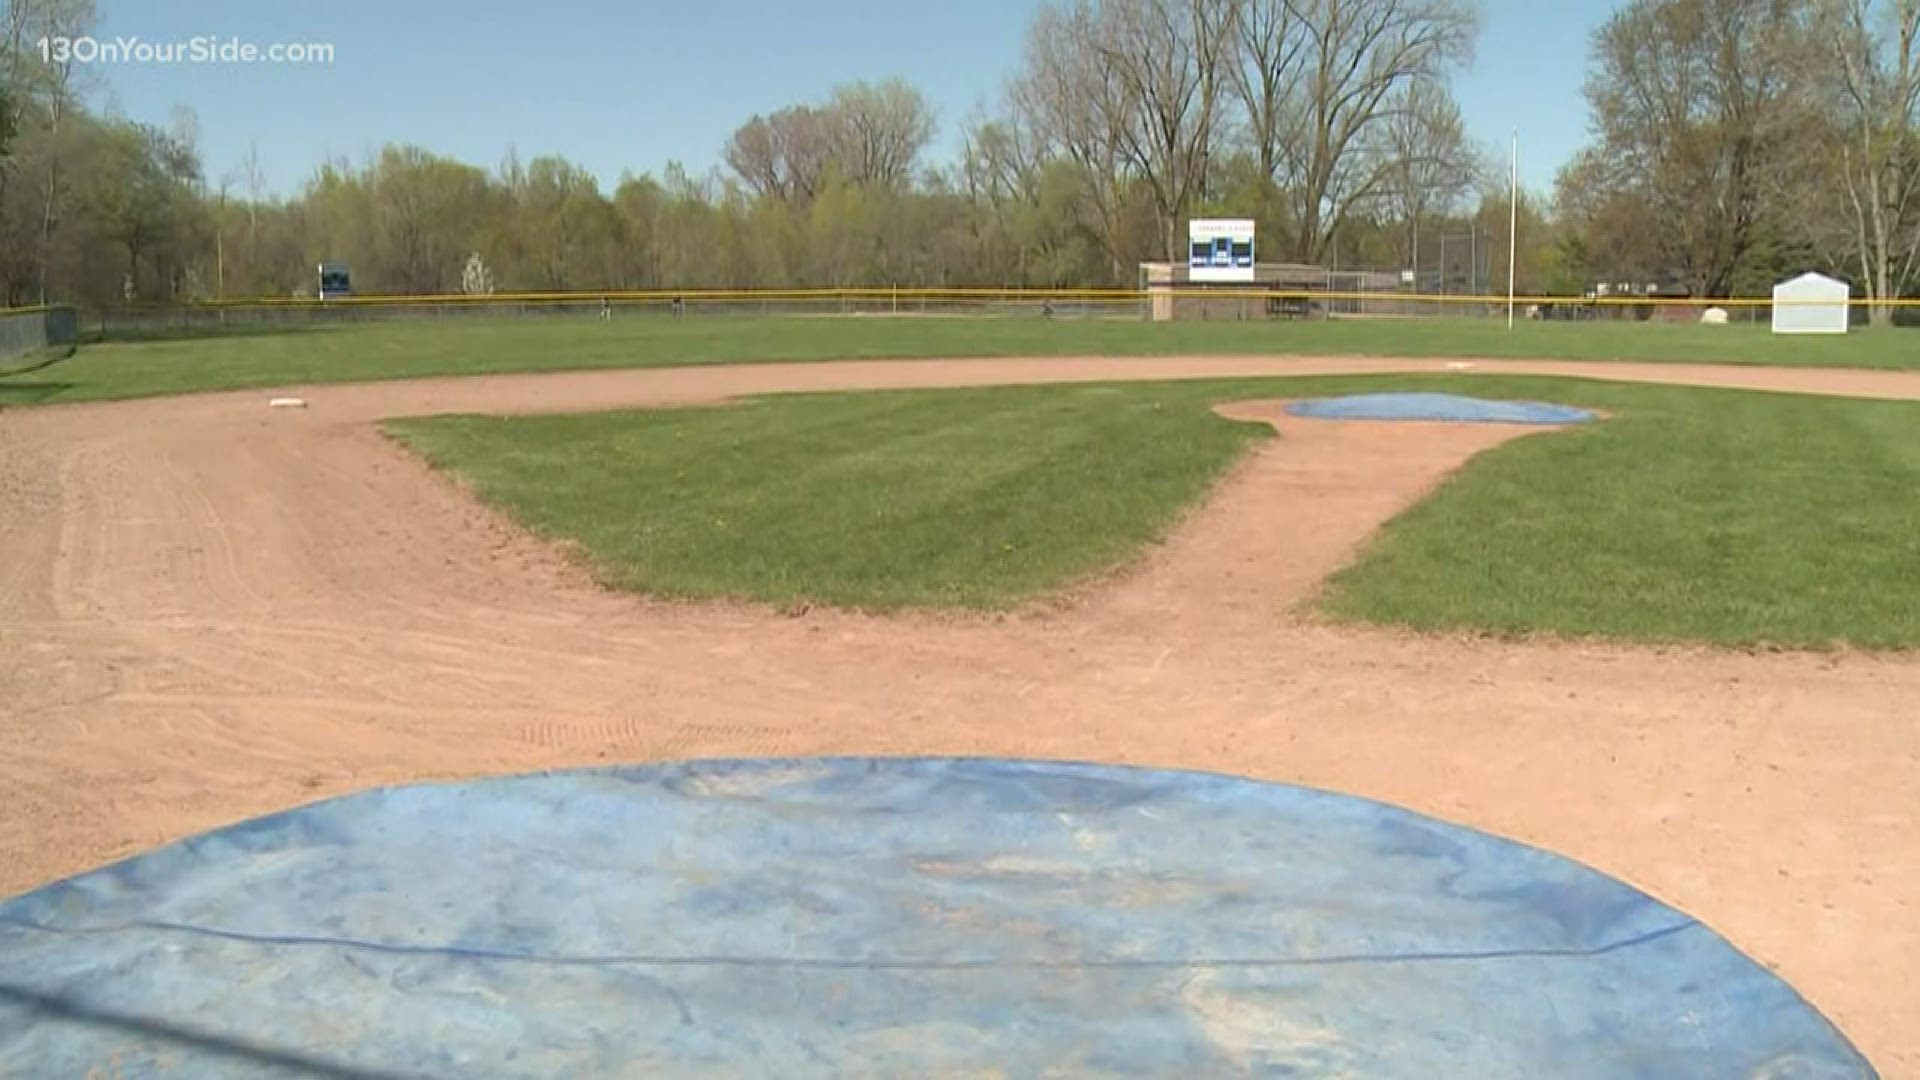 All across the state, many Little League districts have already shut down play for the summer